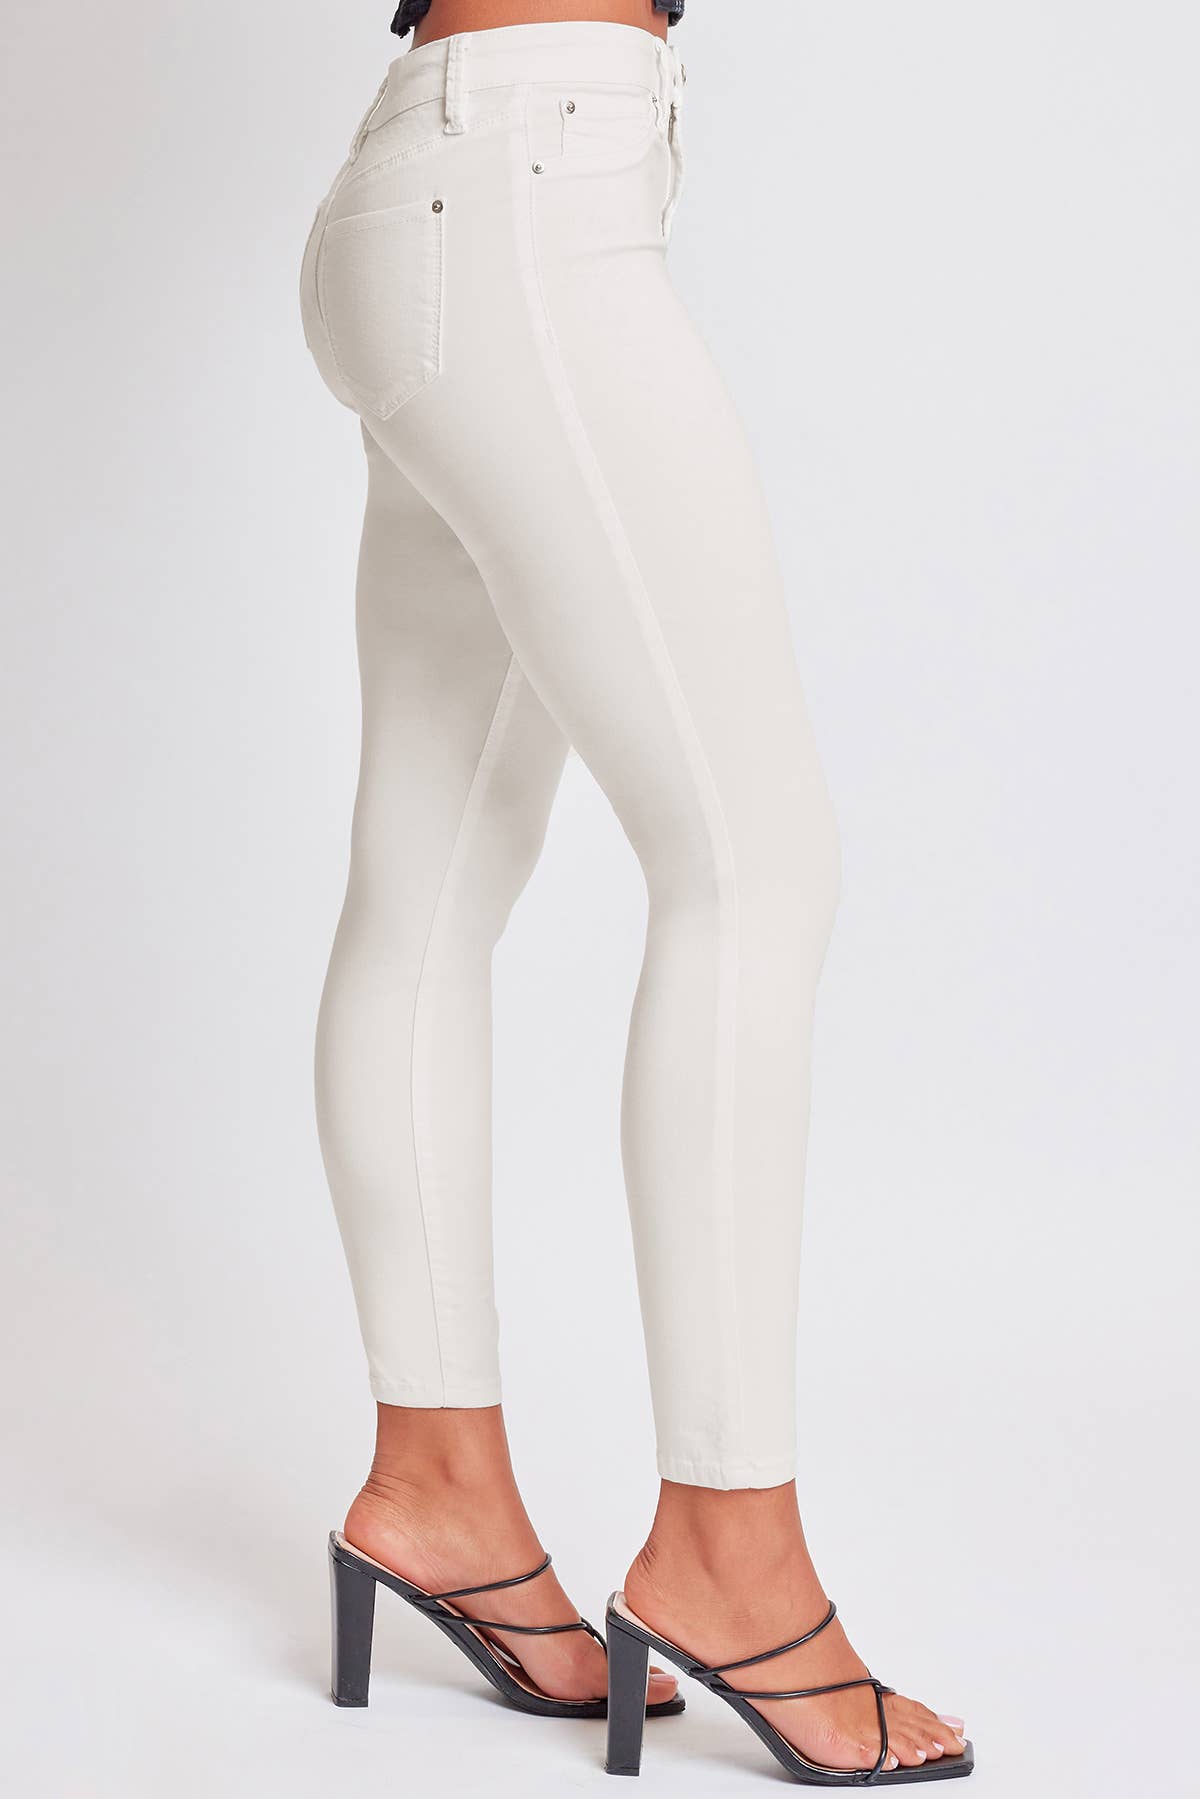 Hyperstretch Mid-Rise Skinny Jean: XL / Junior / Shell Pink